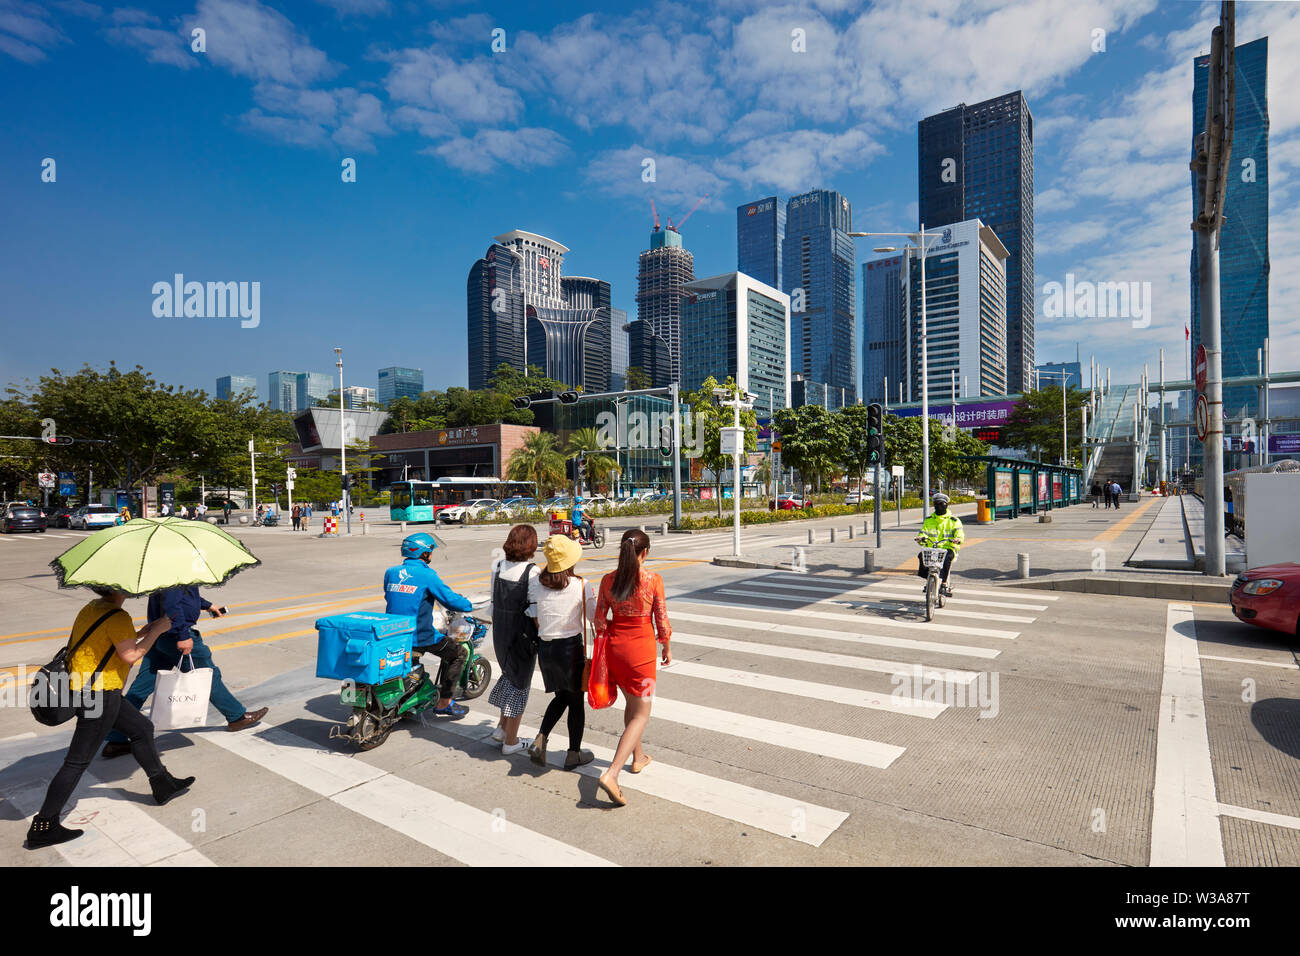 Pedestrians crossing street in Futian Central Business District (CBD). Shenzhen, Guangdong Province, China. Stock Photo